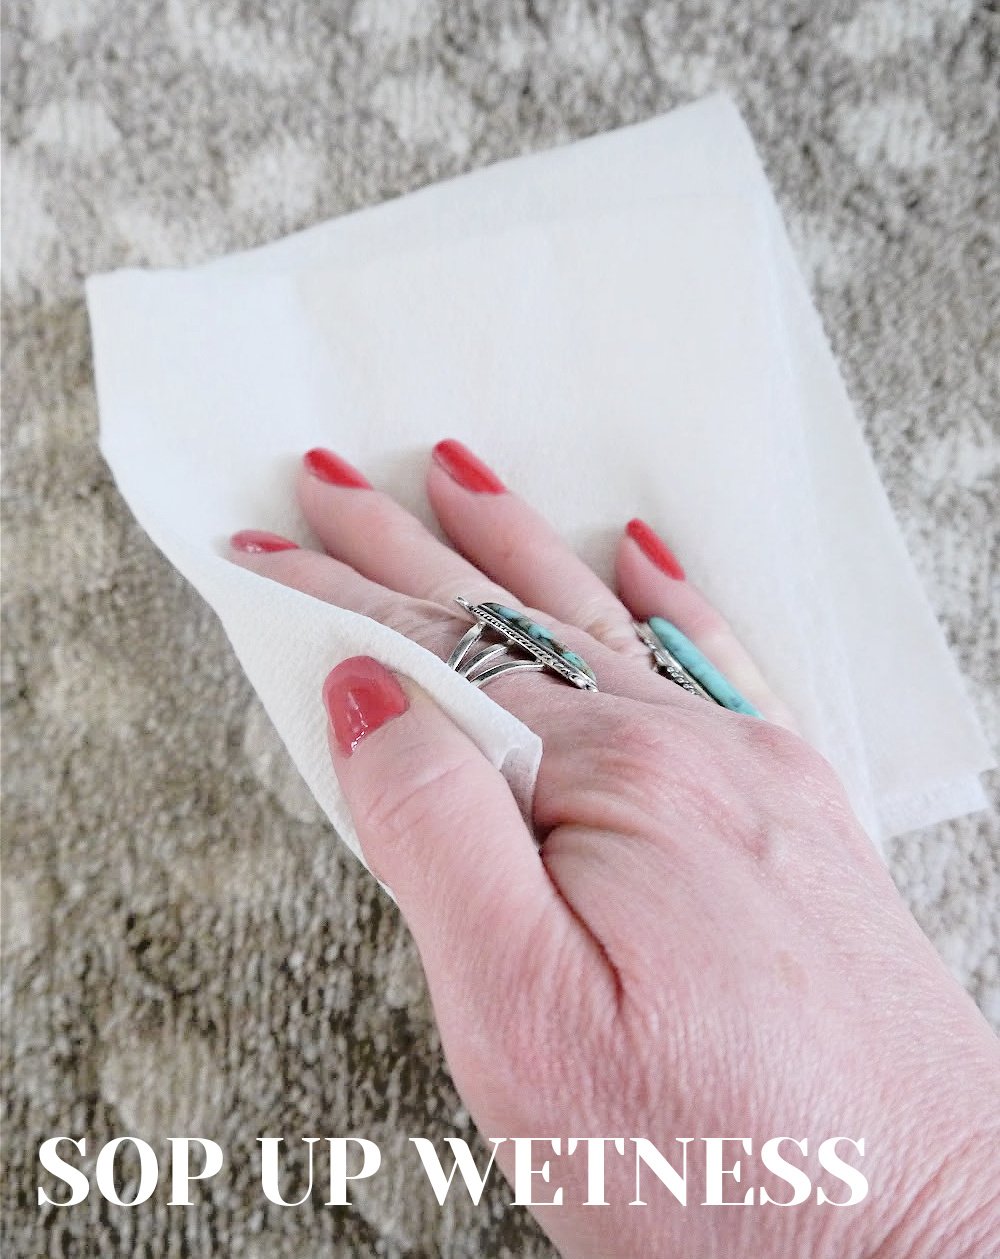 Hand sopping up wet stain with paper towels 